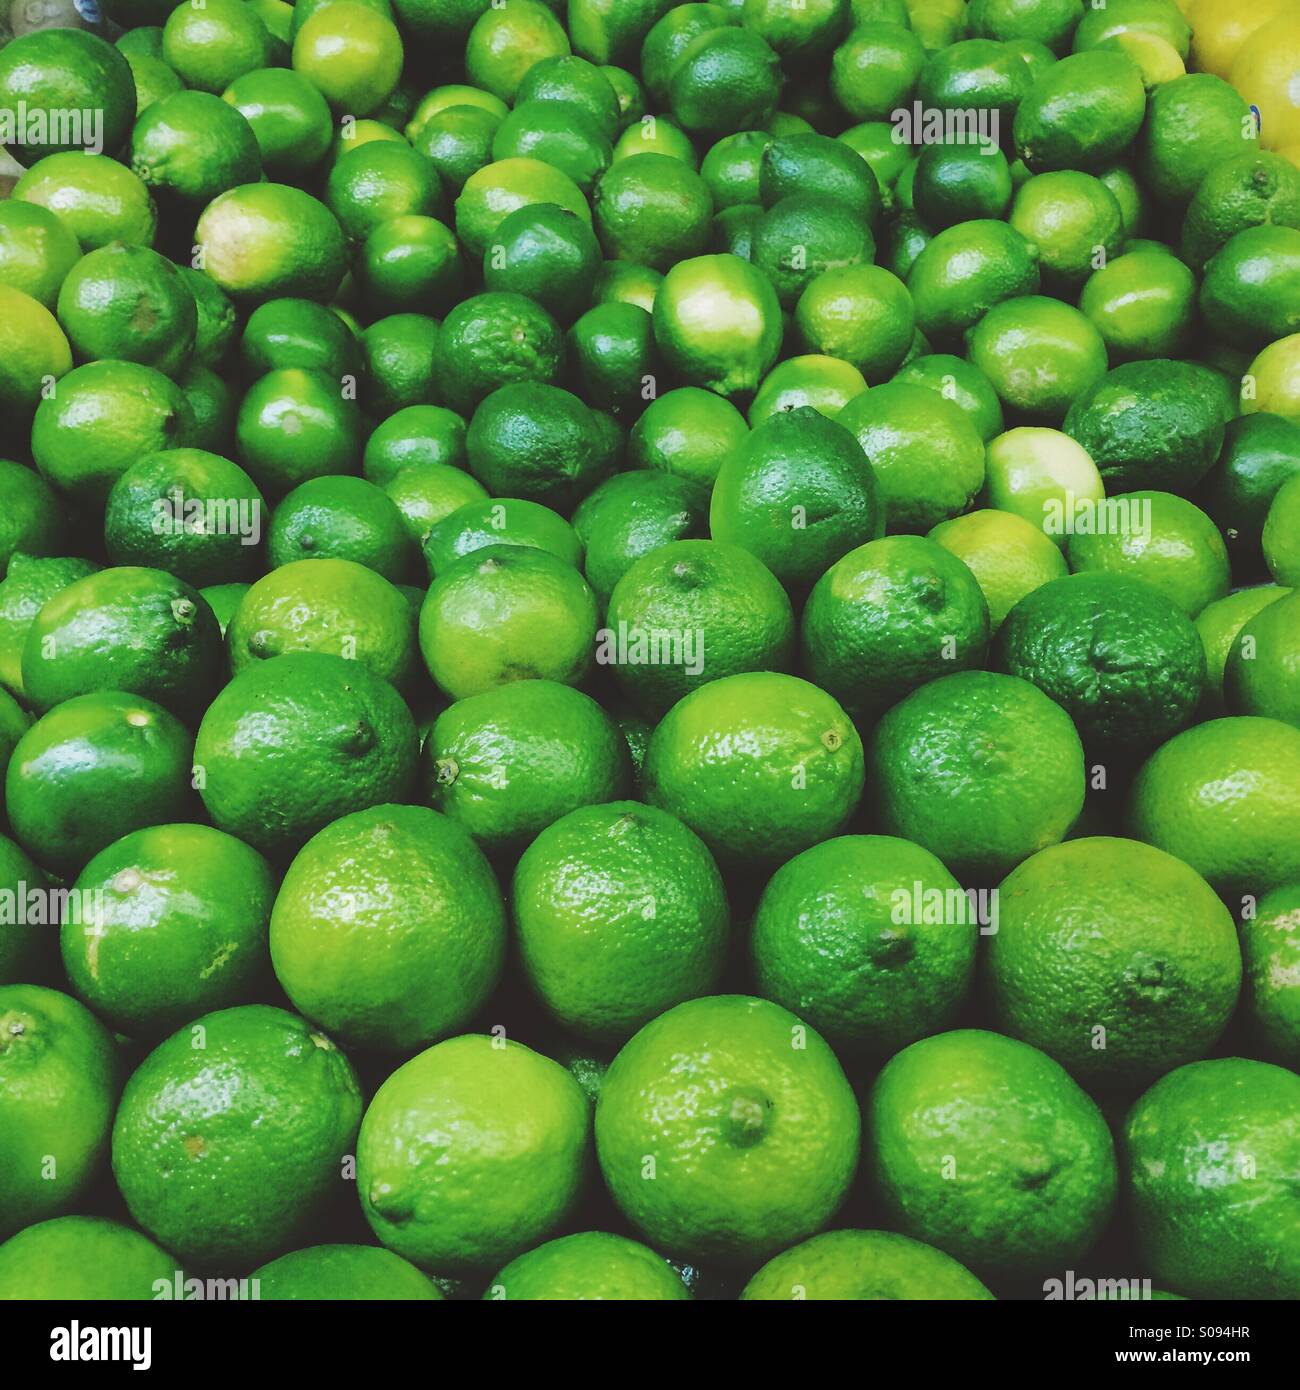 12.29.2014 . lincoln square/ limes . Stock Photo